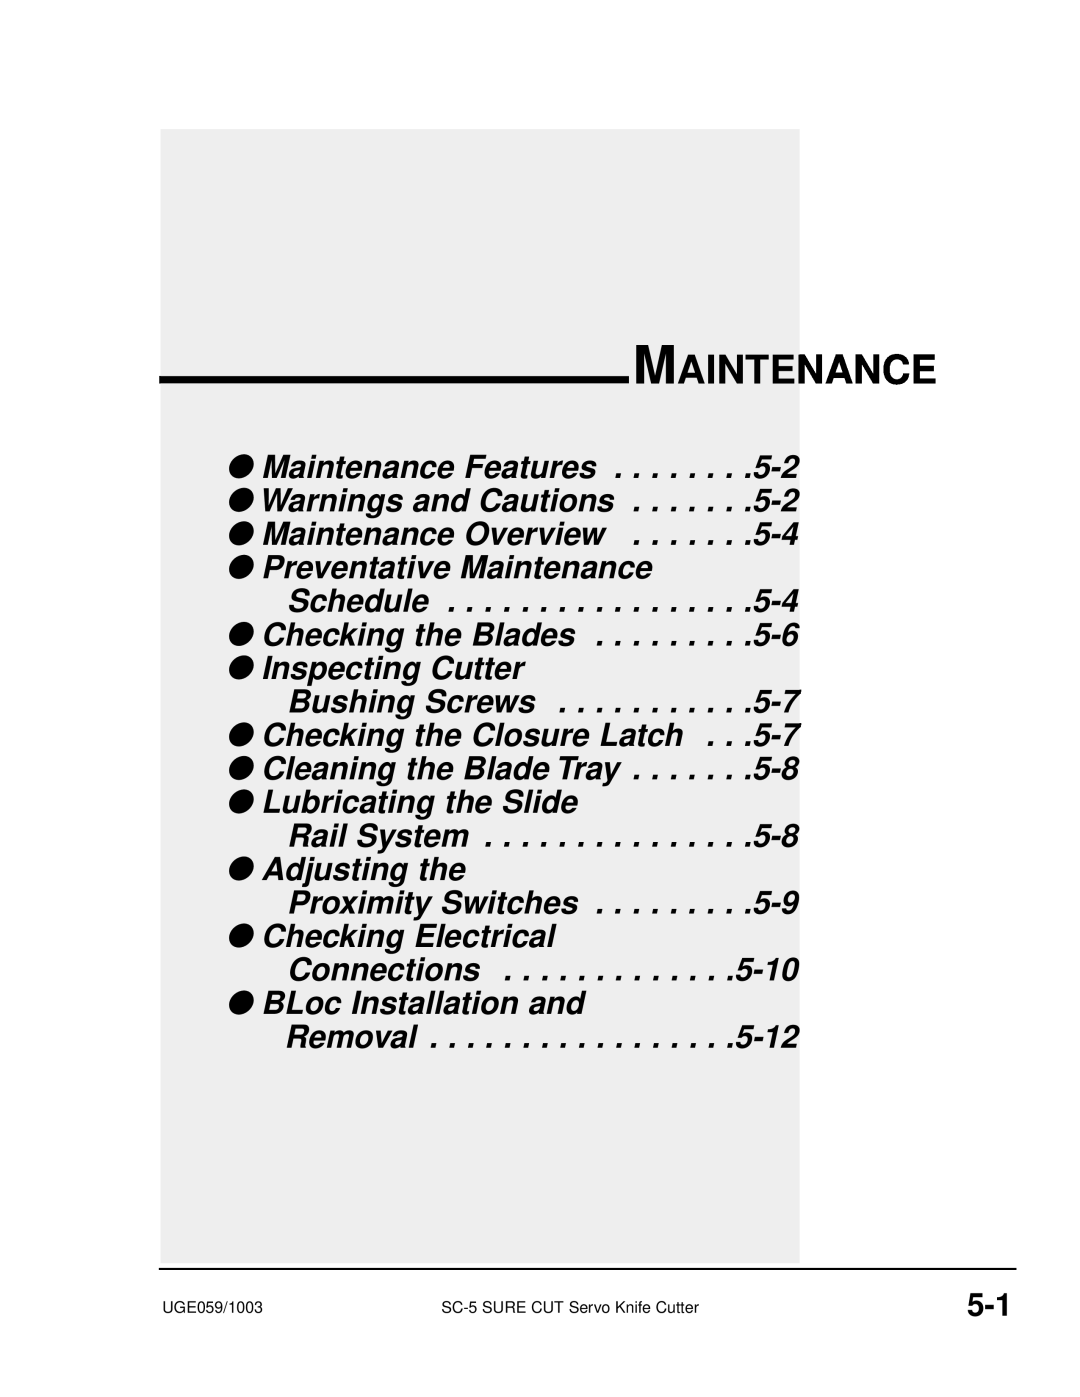 Conair SC-5 manual Maintenance Features Warnings and Cautions Maintenance Overview, BLoc Installation and Removal 